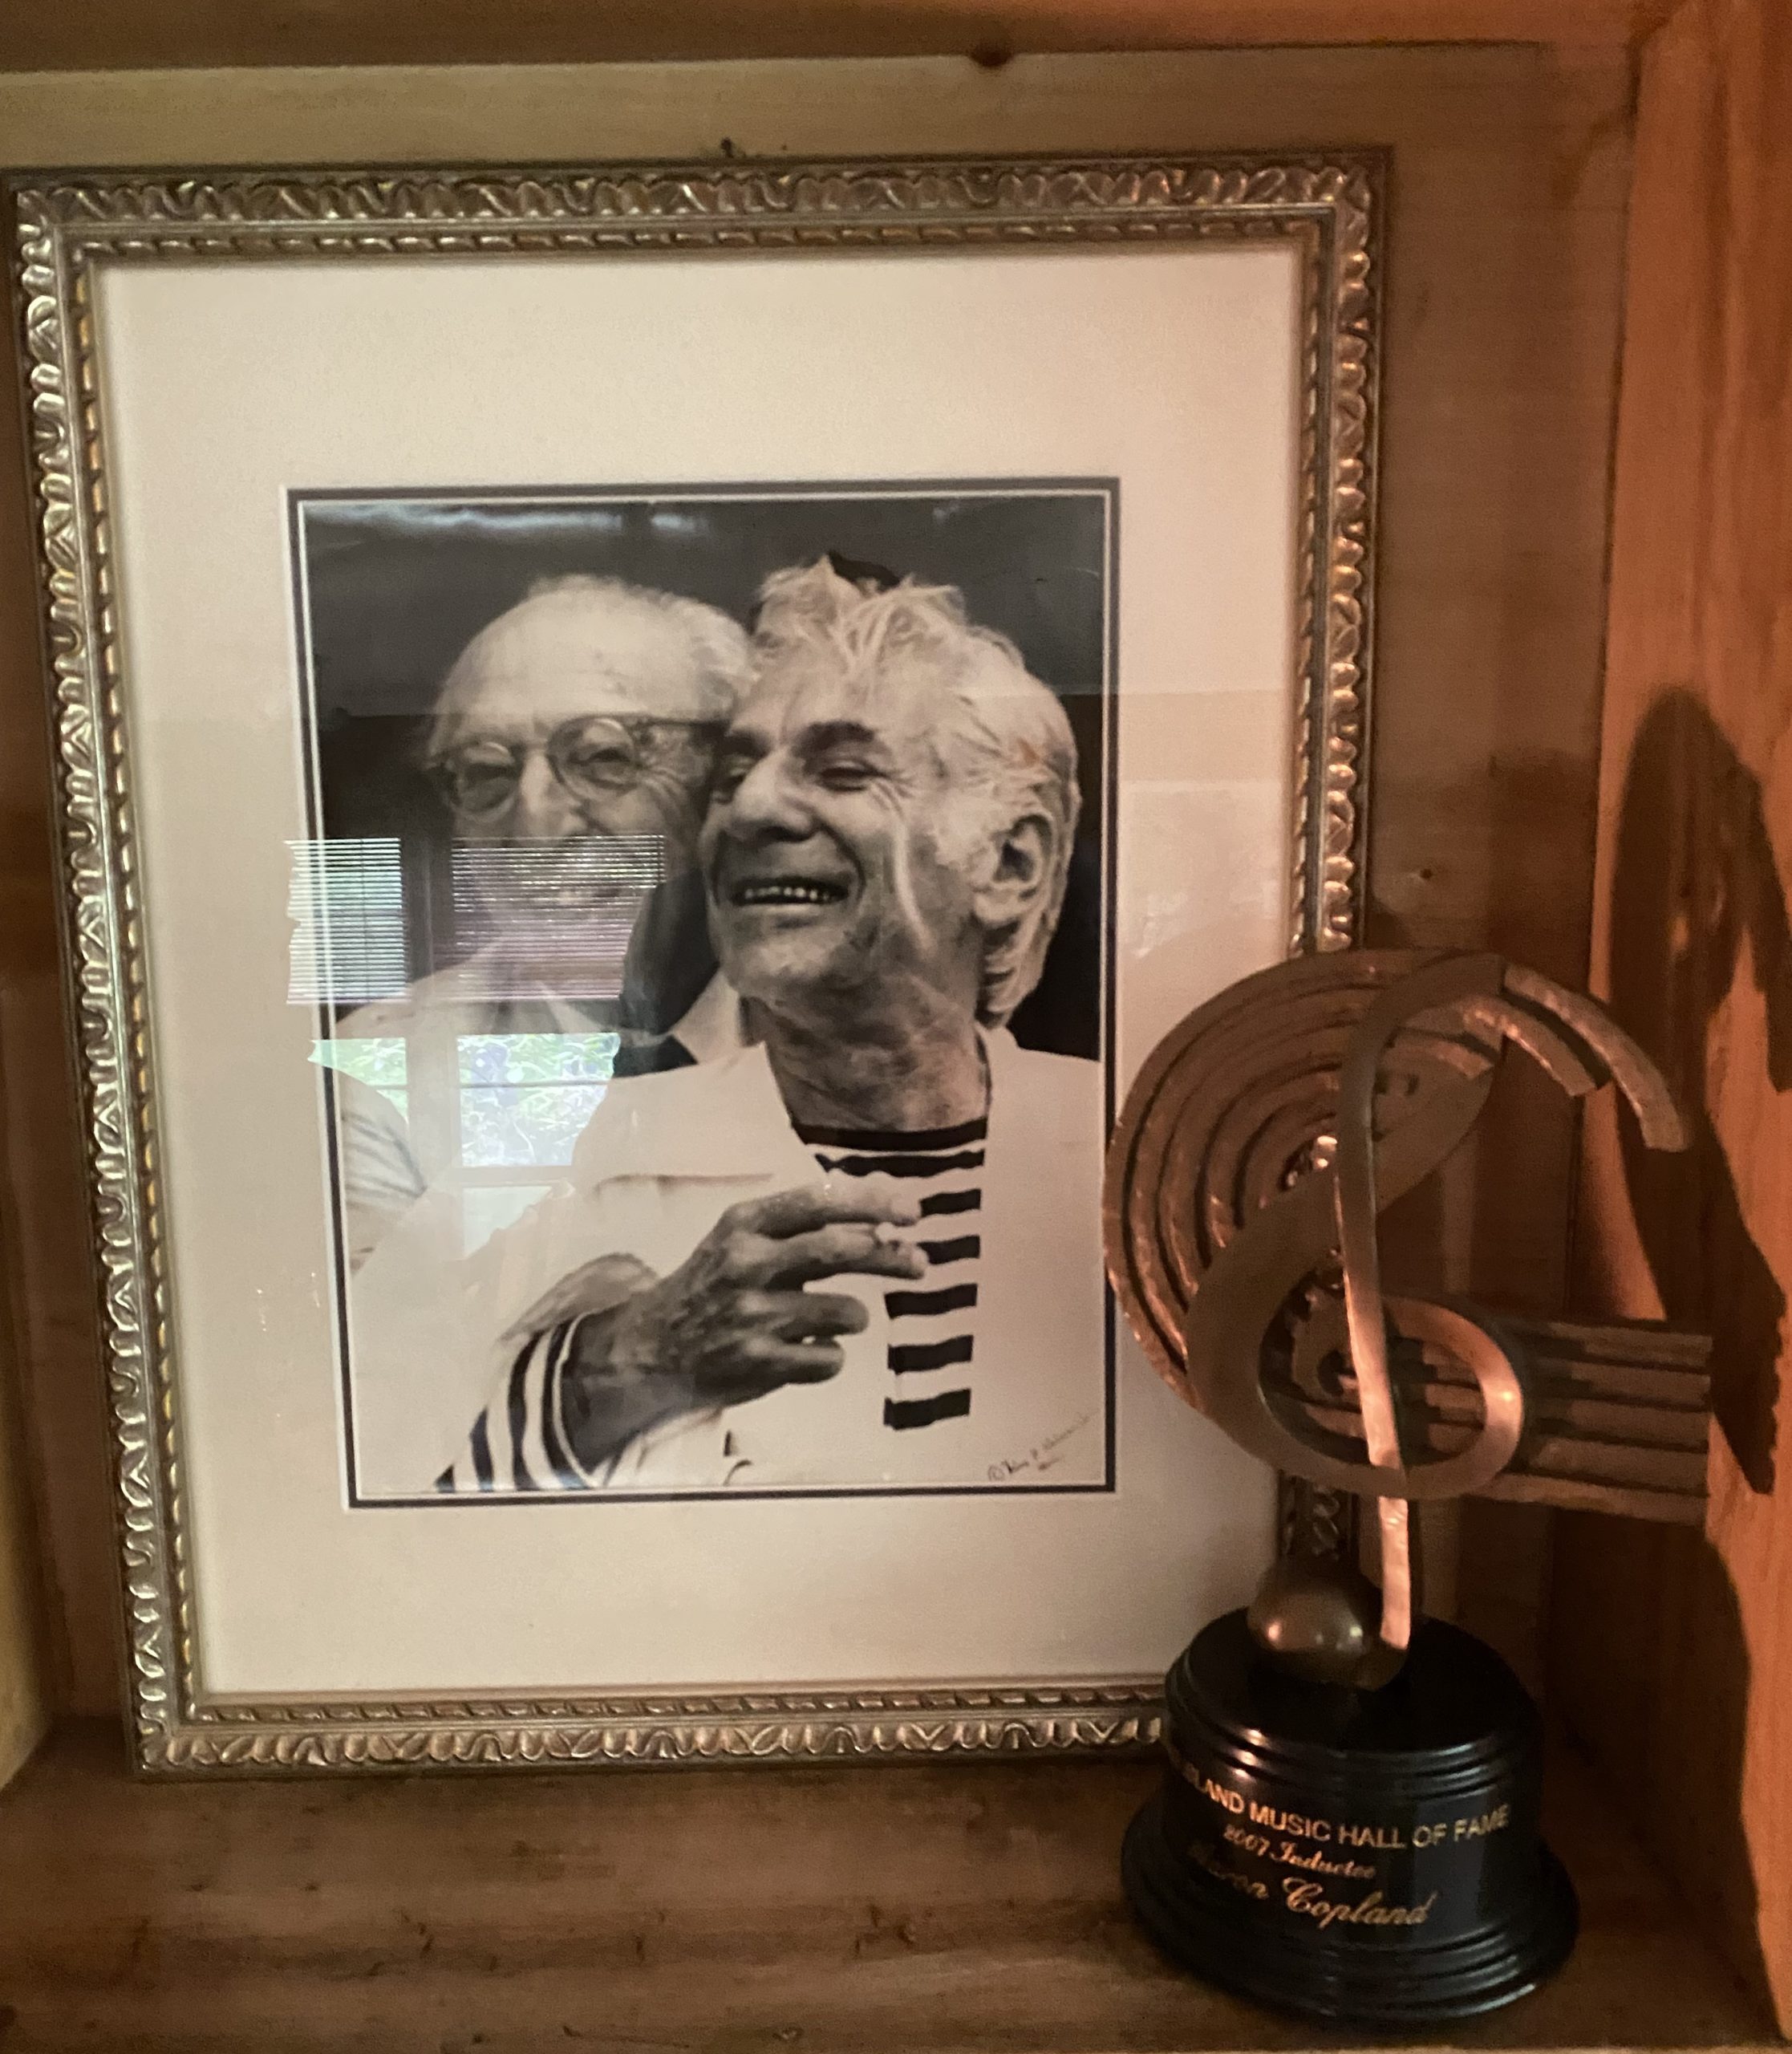 Picture of Aaaron Copland and Leonard Bernstein embracing - framed print at Copland House